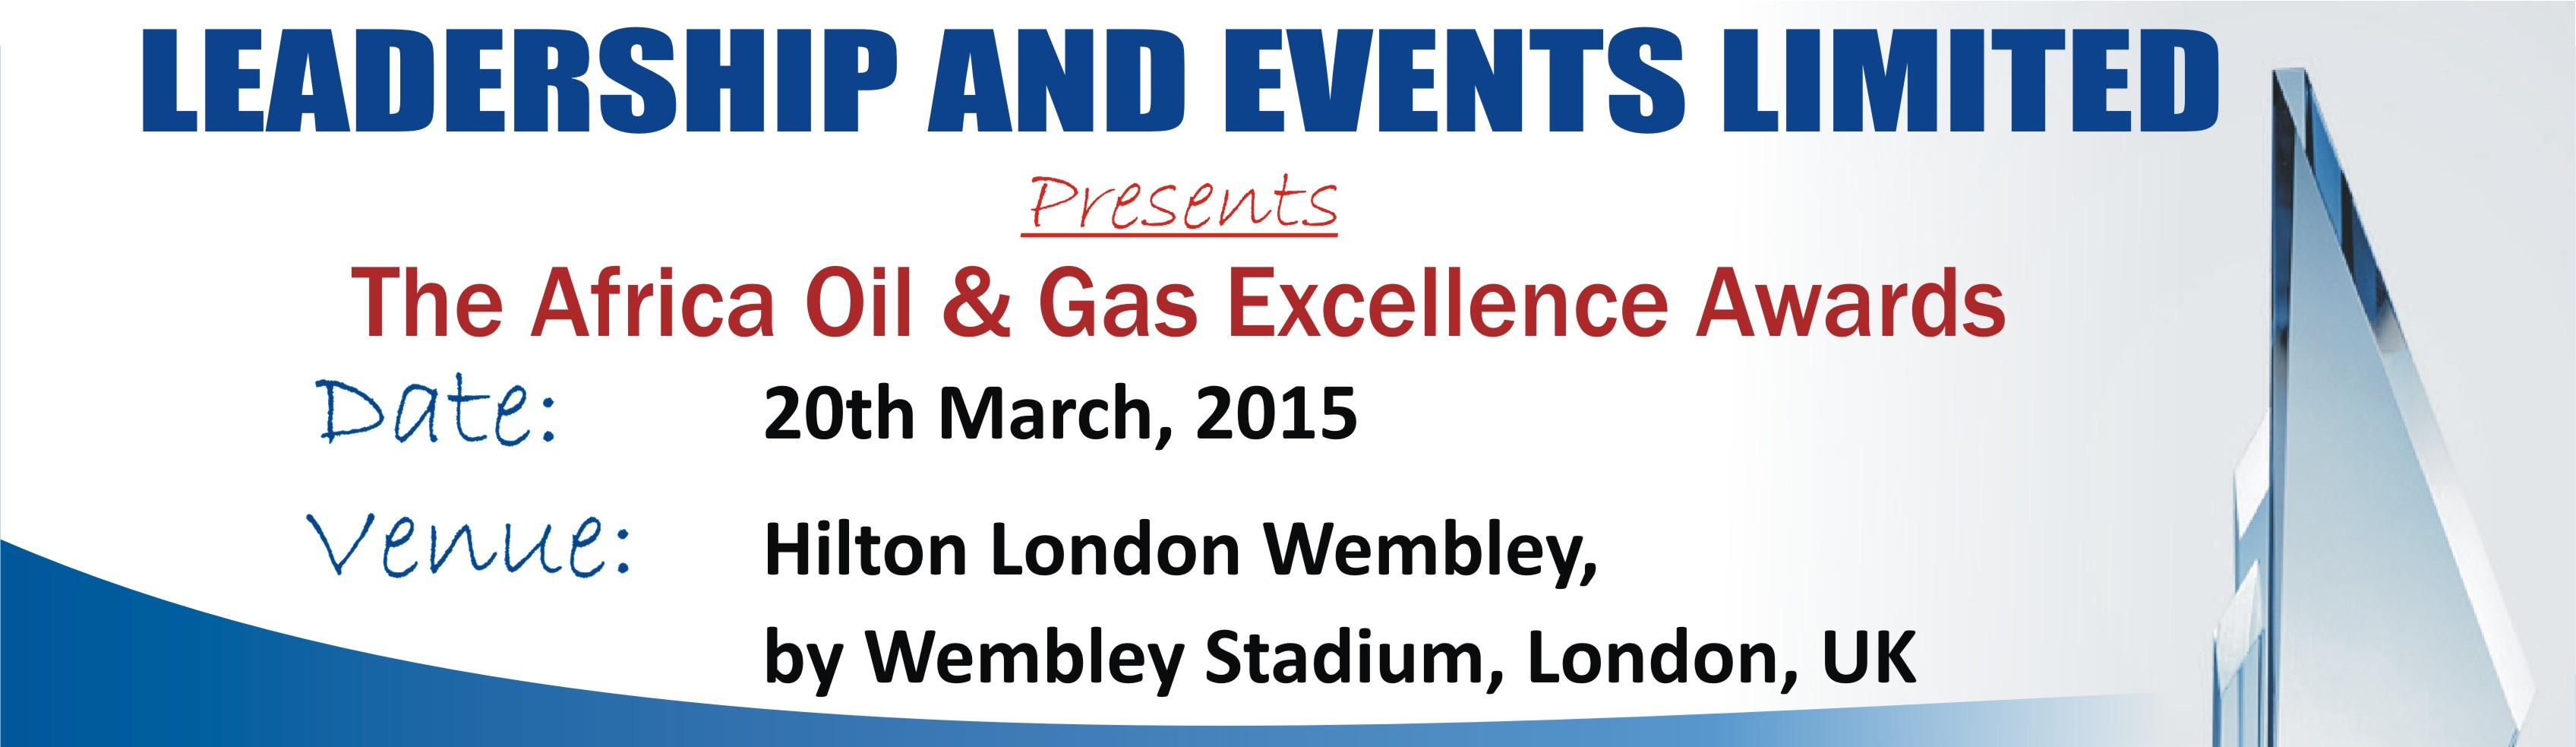 The Africa Oil & Gas Excellence Awards – London, UK